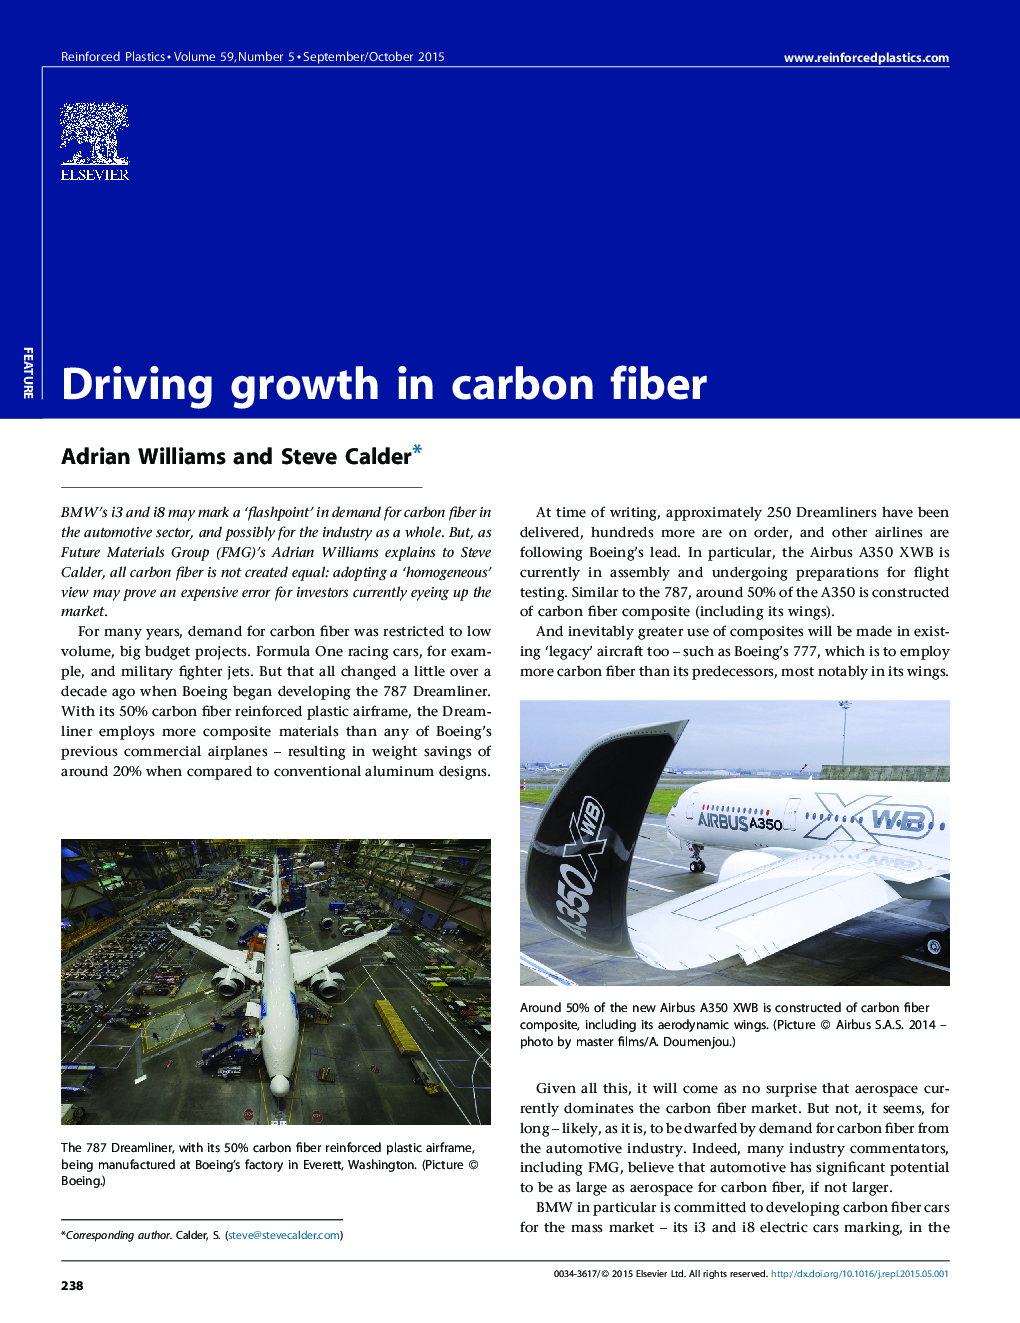 Driving growth in carbon fiber